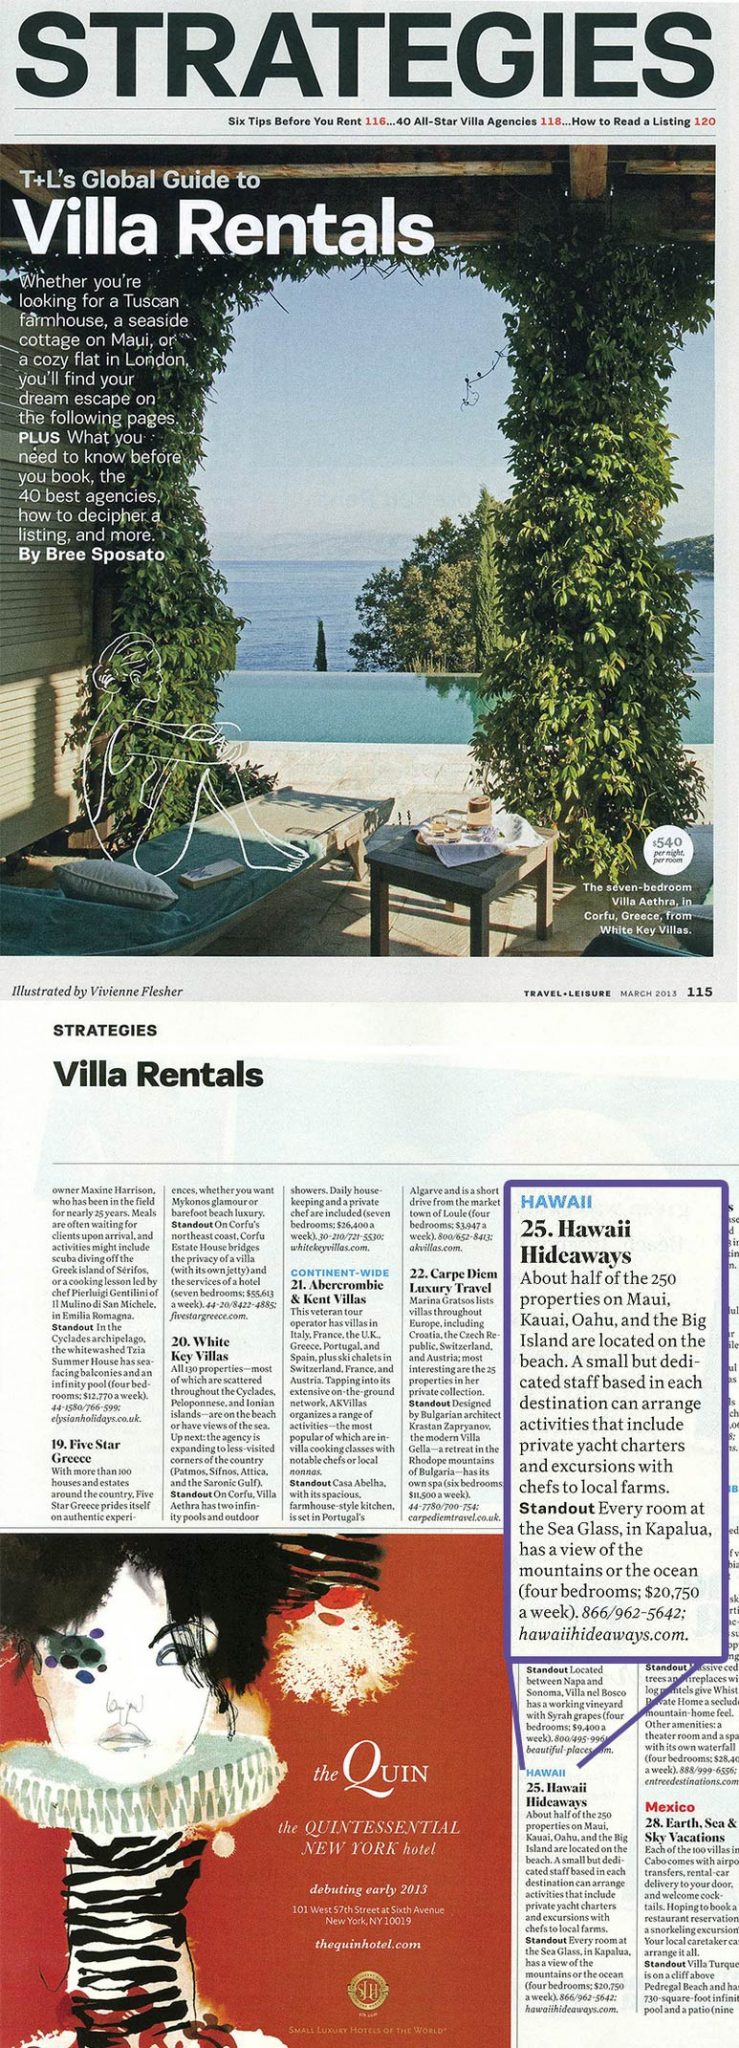 2013-03-travel-leisure-guide-to-villa-rentals-article